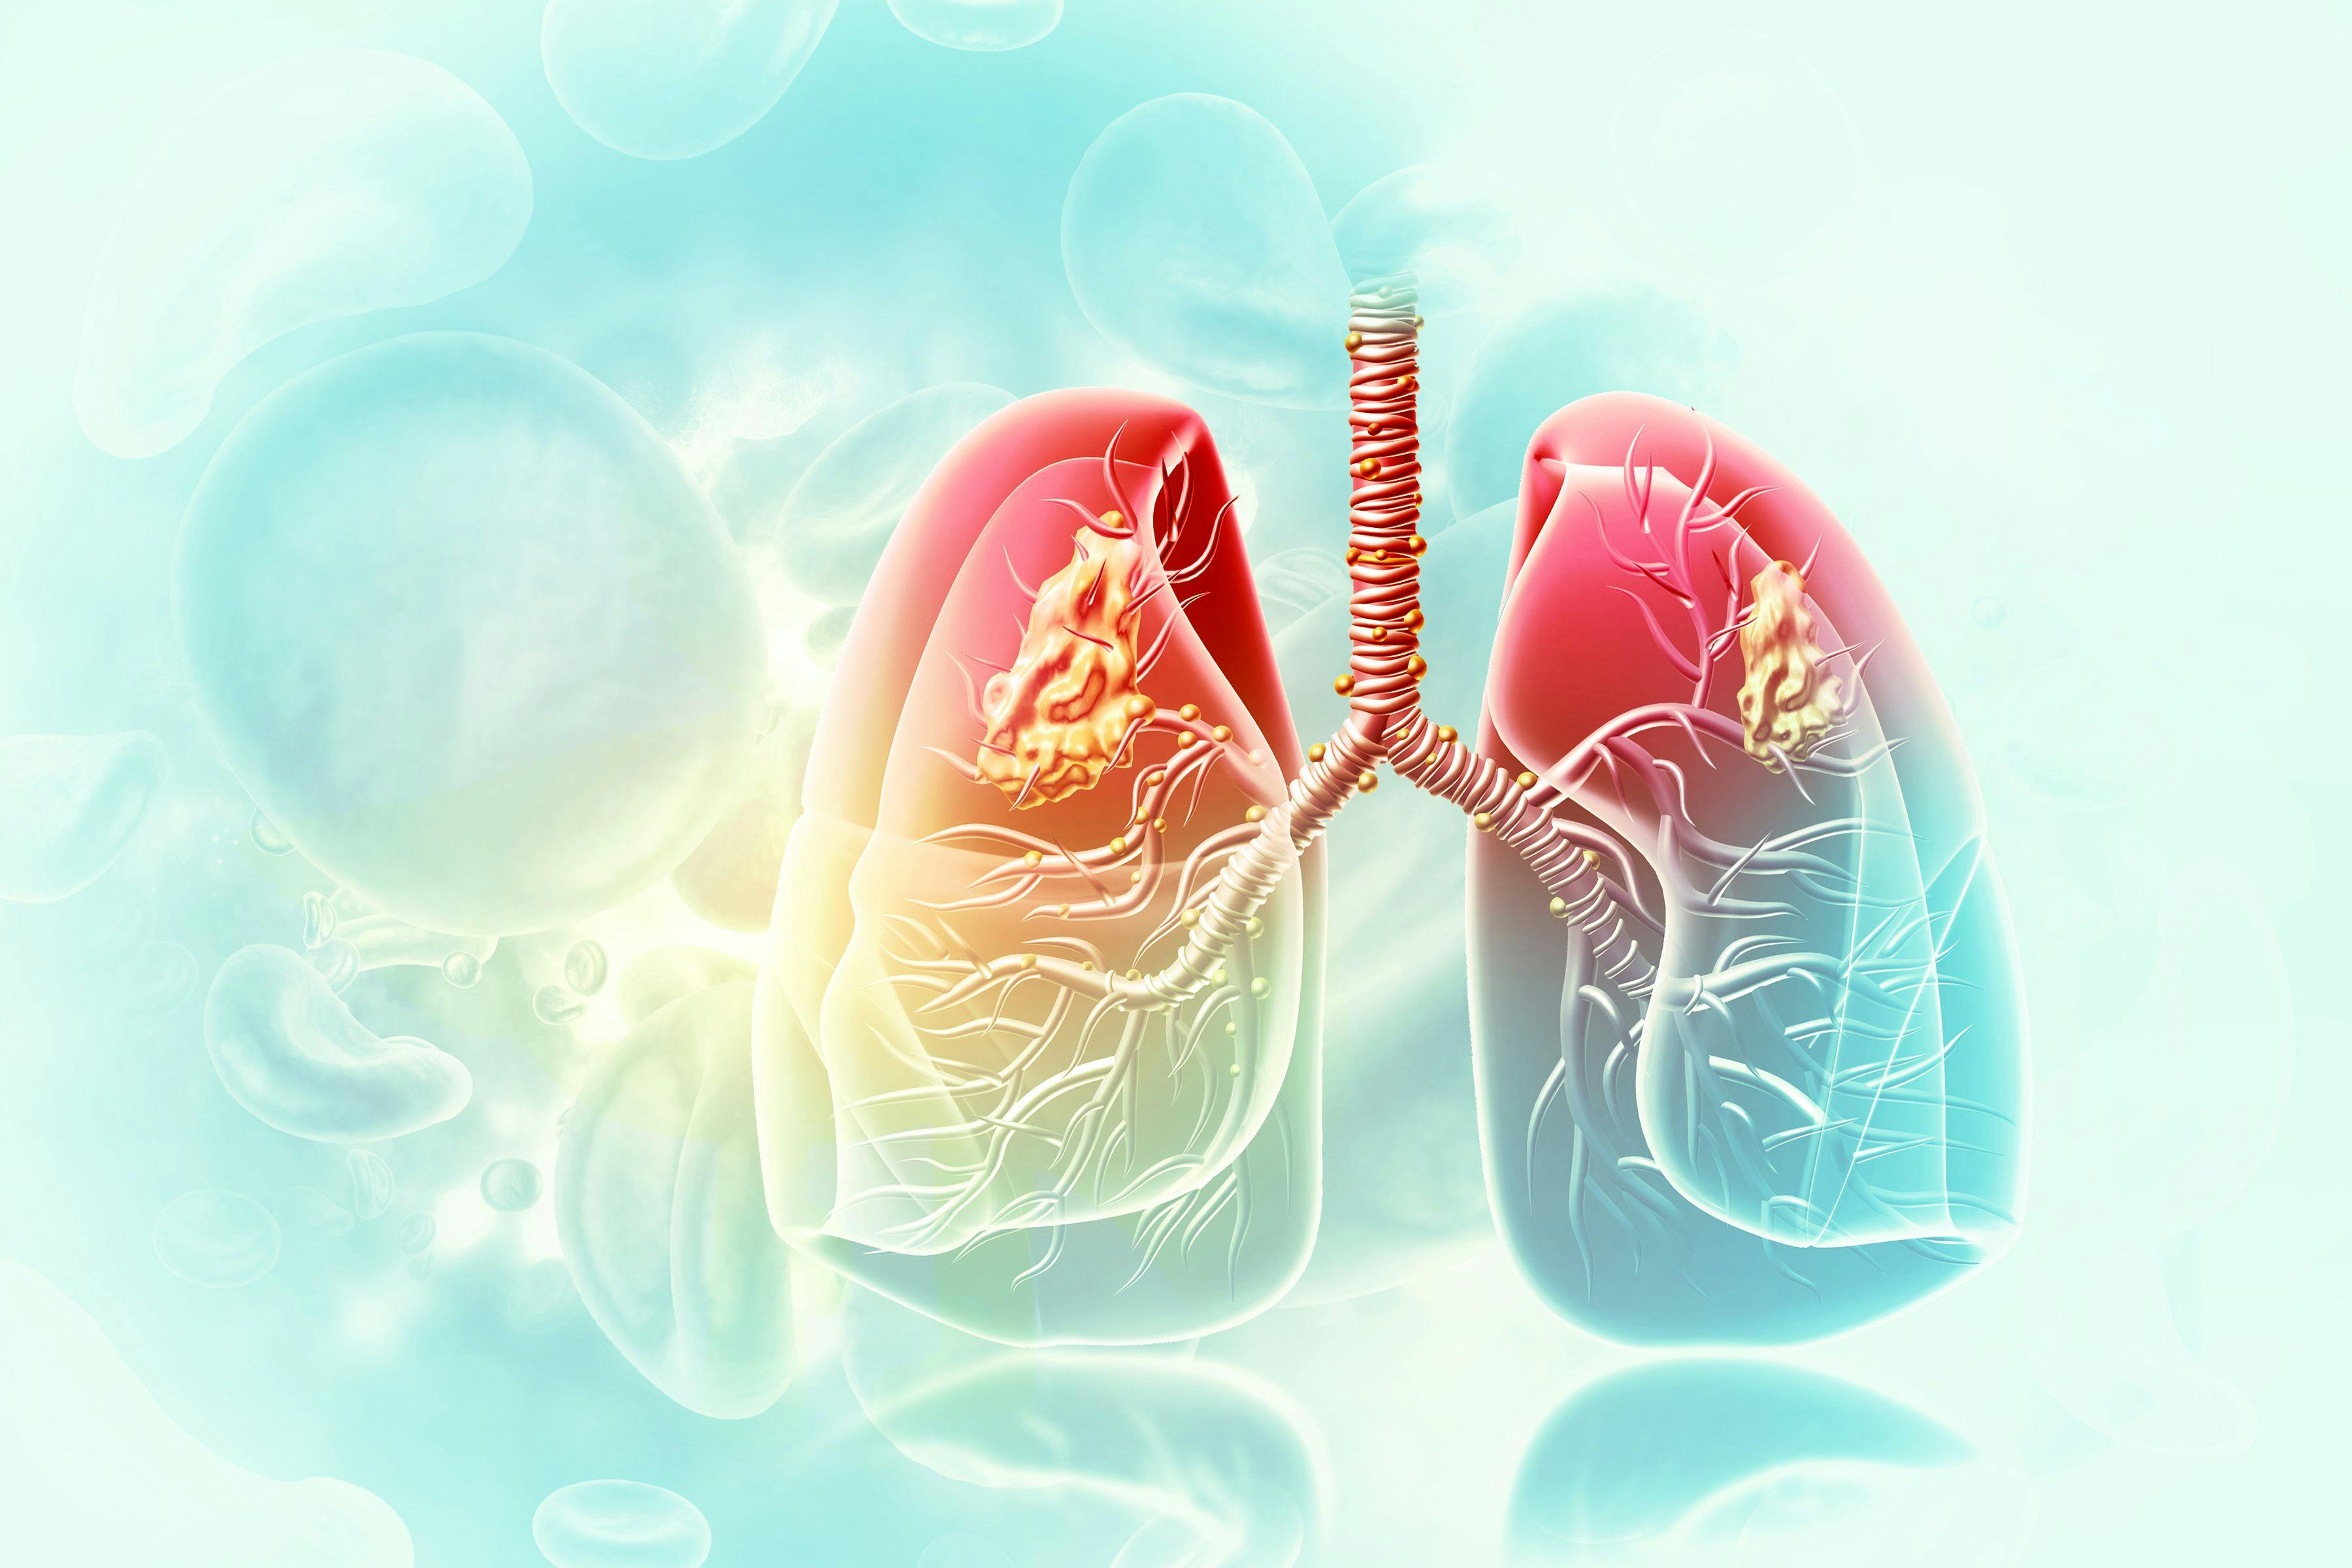 Amivantimab-vmjw was approved to treat patients with NSCLC with certain characteristics. | image credit: Crystal Light - stock.adobe.com